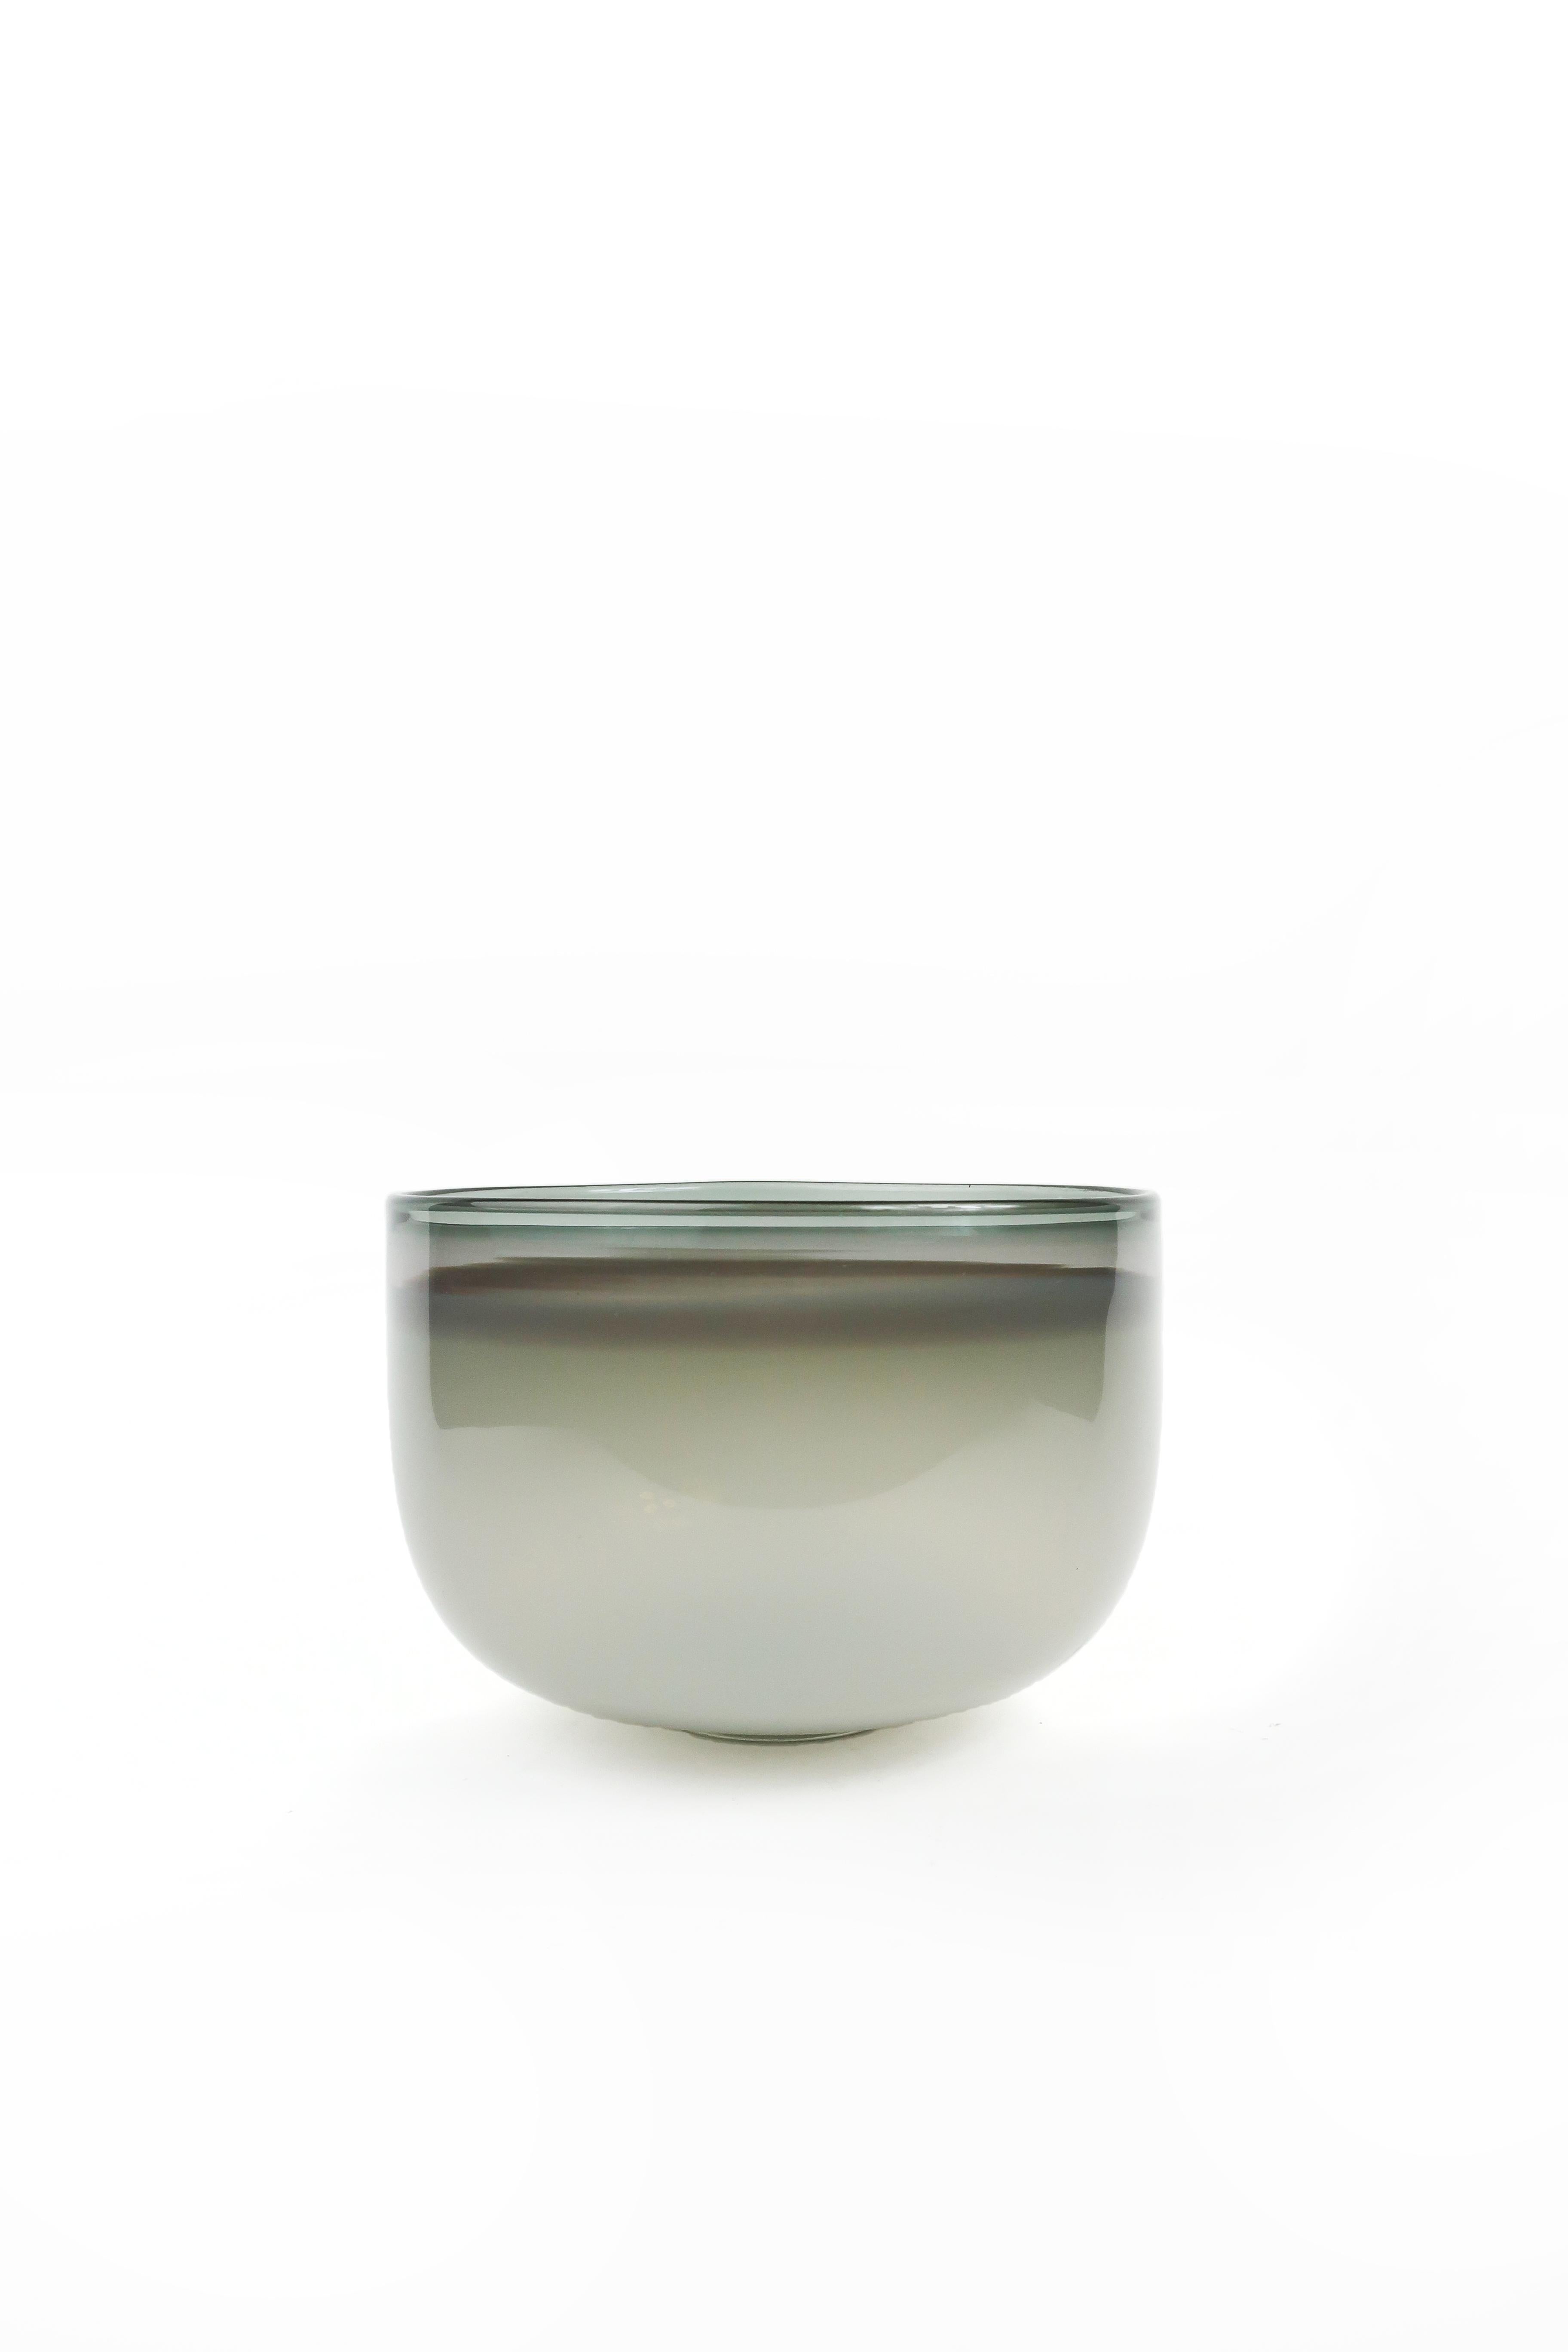 White and Gray Studio Glass Bowl by Guggisberg Baldwin In Good Condition For Sale In Brooklyn, NY